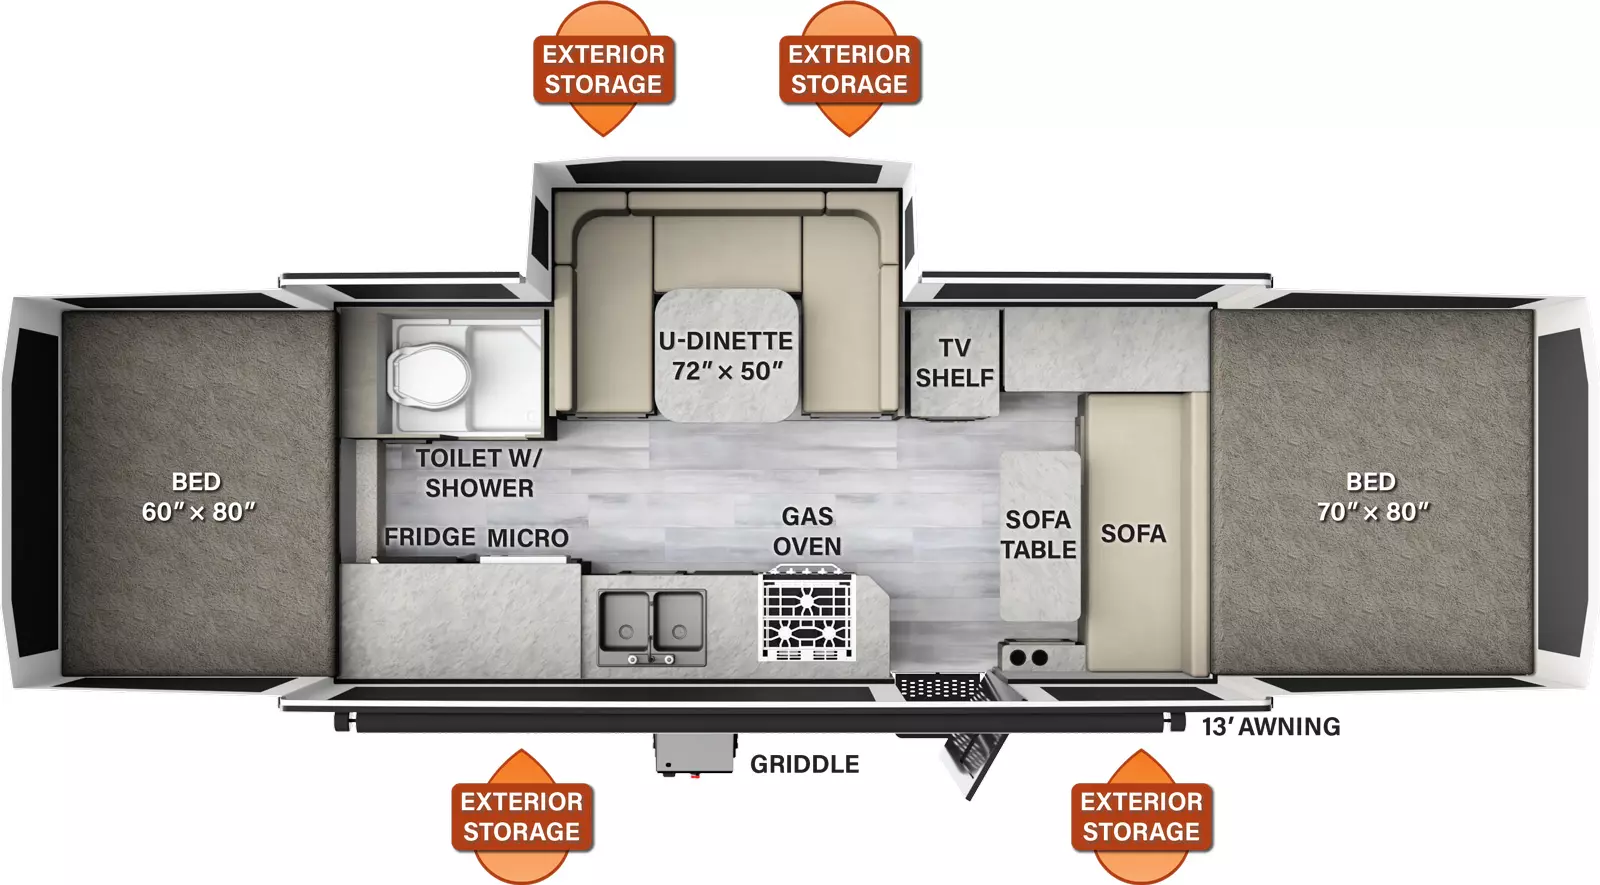 The HW296 has one slide out on the off-door side and one entry door. Exterior features include a 13 foot awning, griddle, and exterior storage on both sides. Interior layout from front to back: front tent bed; sofa, sofa table, cabinet, and TV shelf; off-door side u-dinette slideout and toilet with shower; door side gas oven, sink and cabinet with microwave and refrigerator; rear tent bed. 